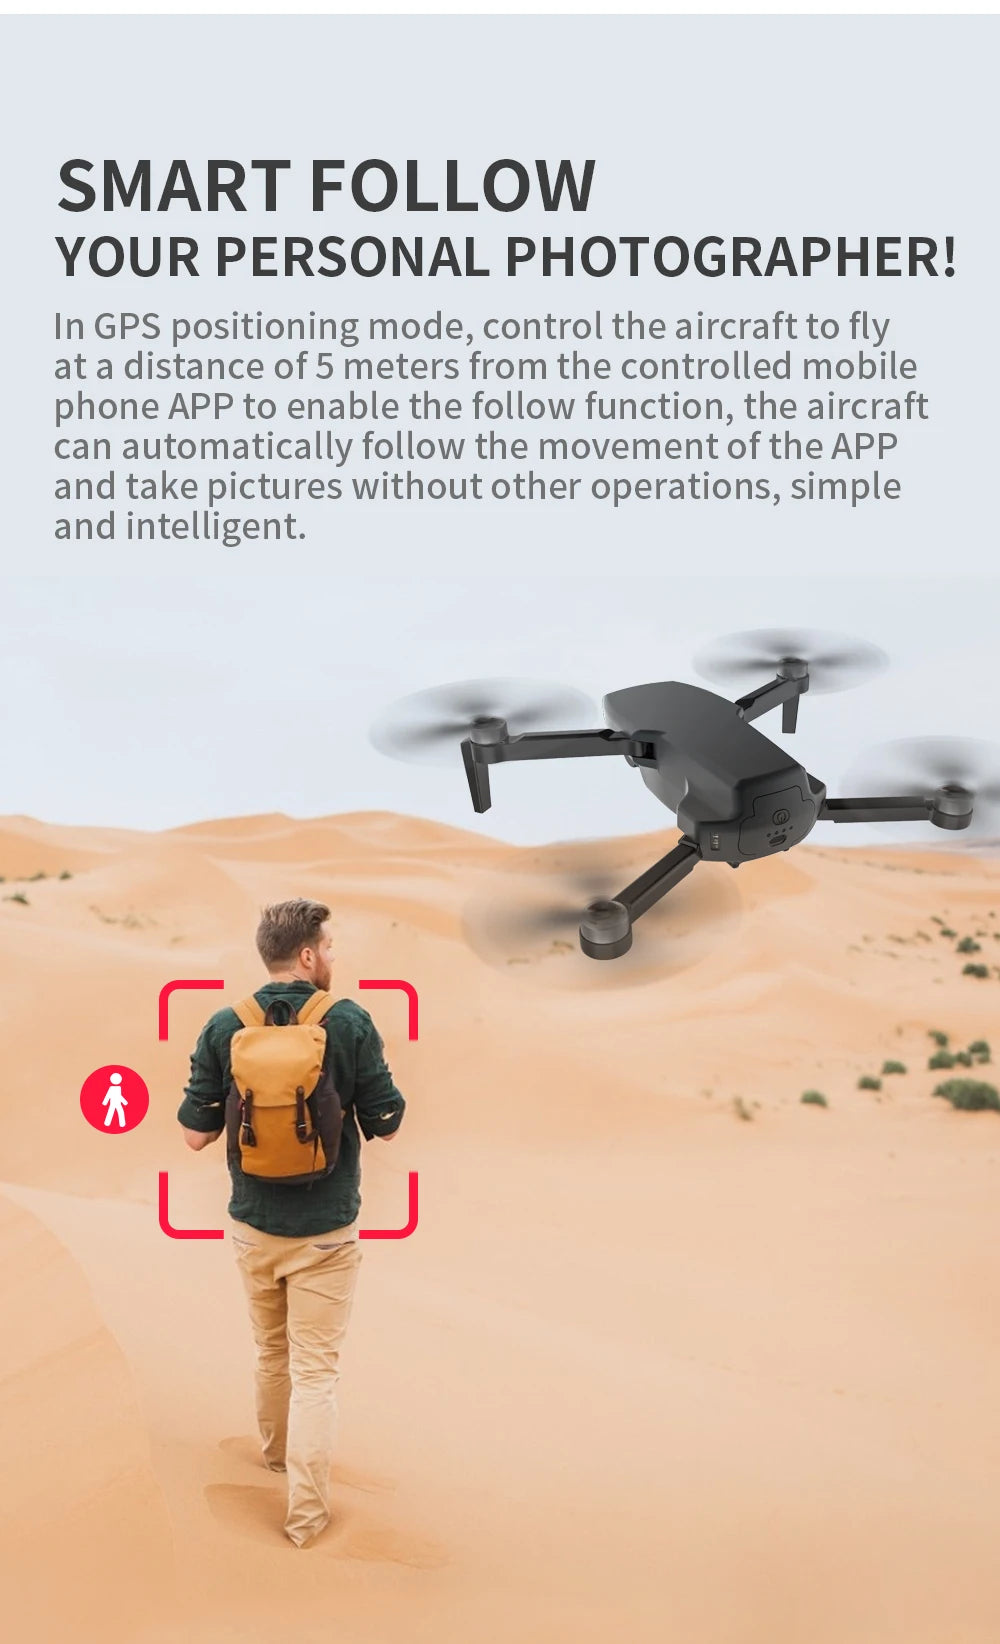 G108 Pro MAx Drone, control the aircraft to fly at a distance of 5 meters from the controlled mobile phone APP